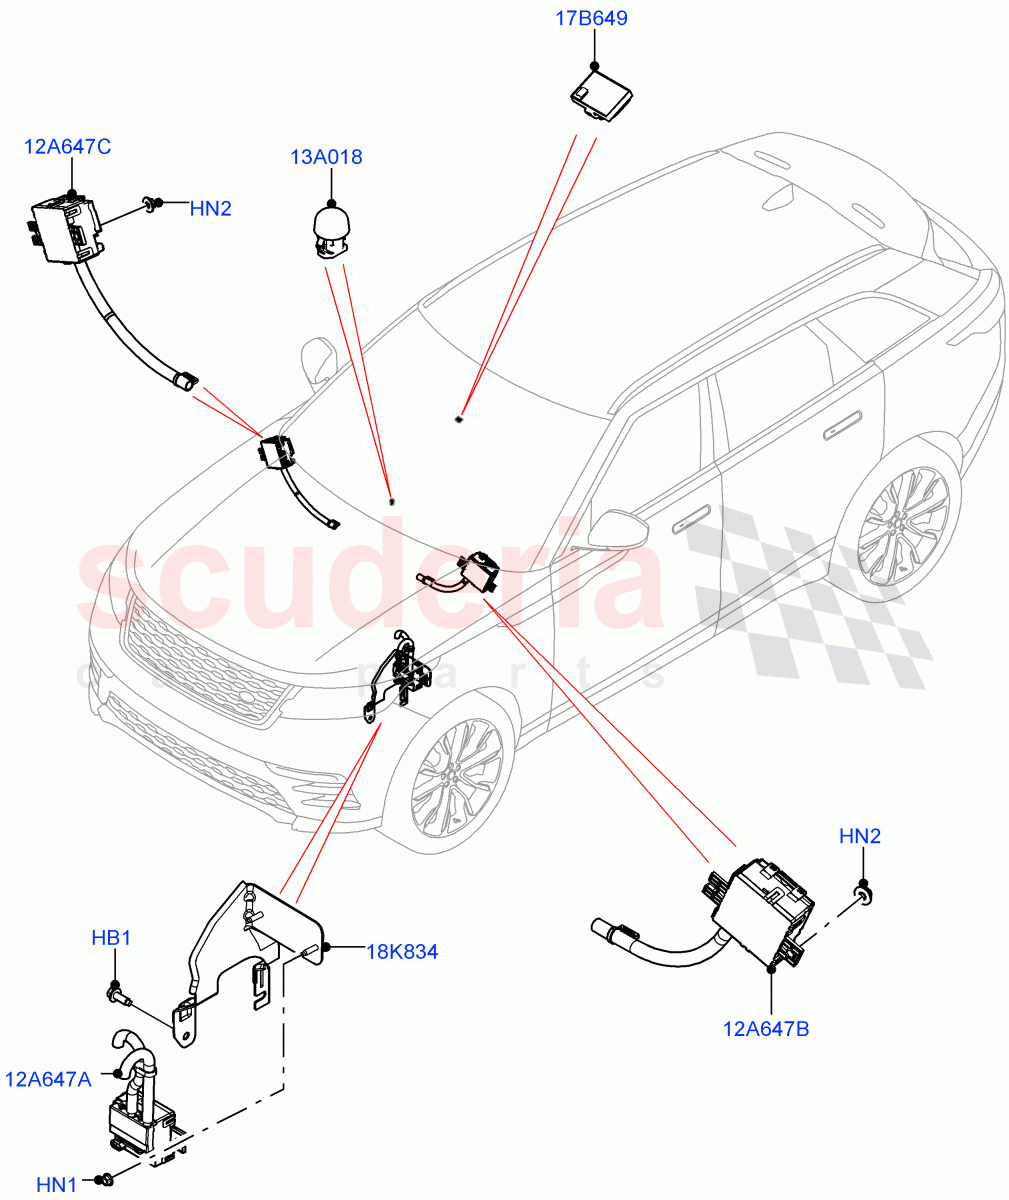 Air Conditioning And Heater Sensors((V)FROMNA000001) of Land Rover Land Rover Range Rover Velar (2017+) [2.0 Turbo Diesel]